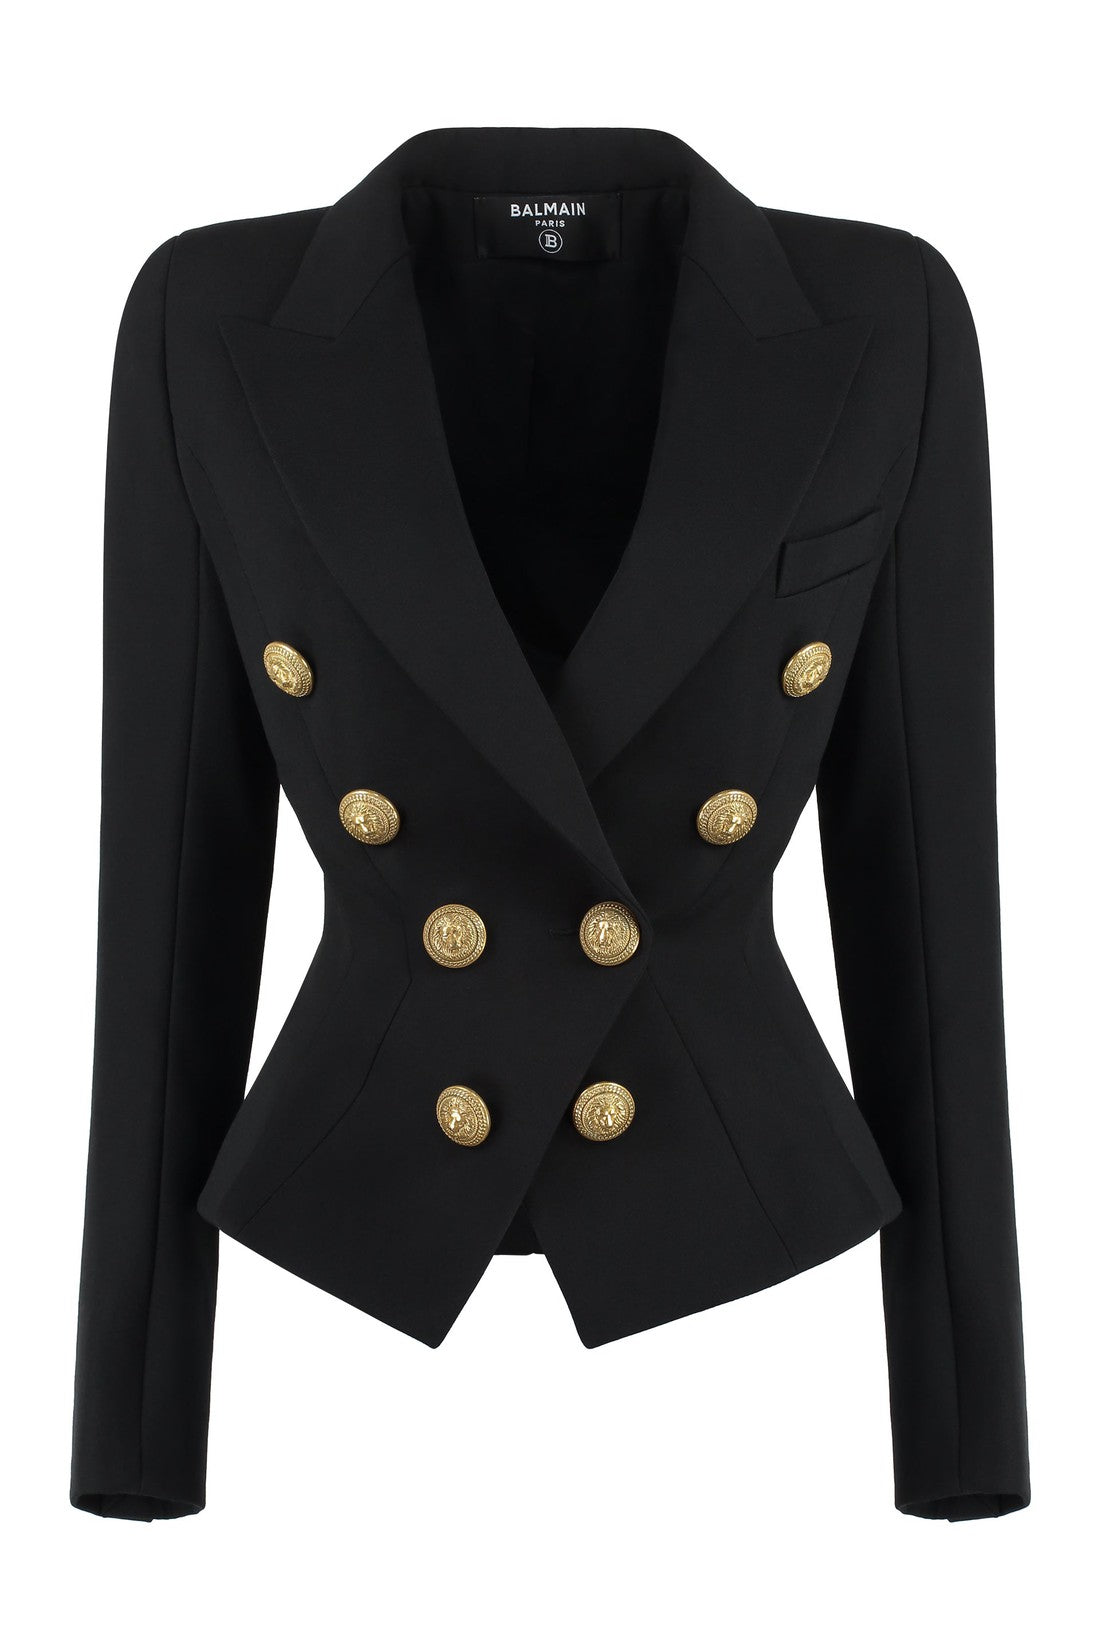 Balmain-OUTLET-SALE-Double-breasted virgin wool jacket-ARCHIVIST